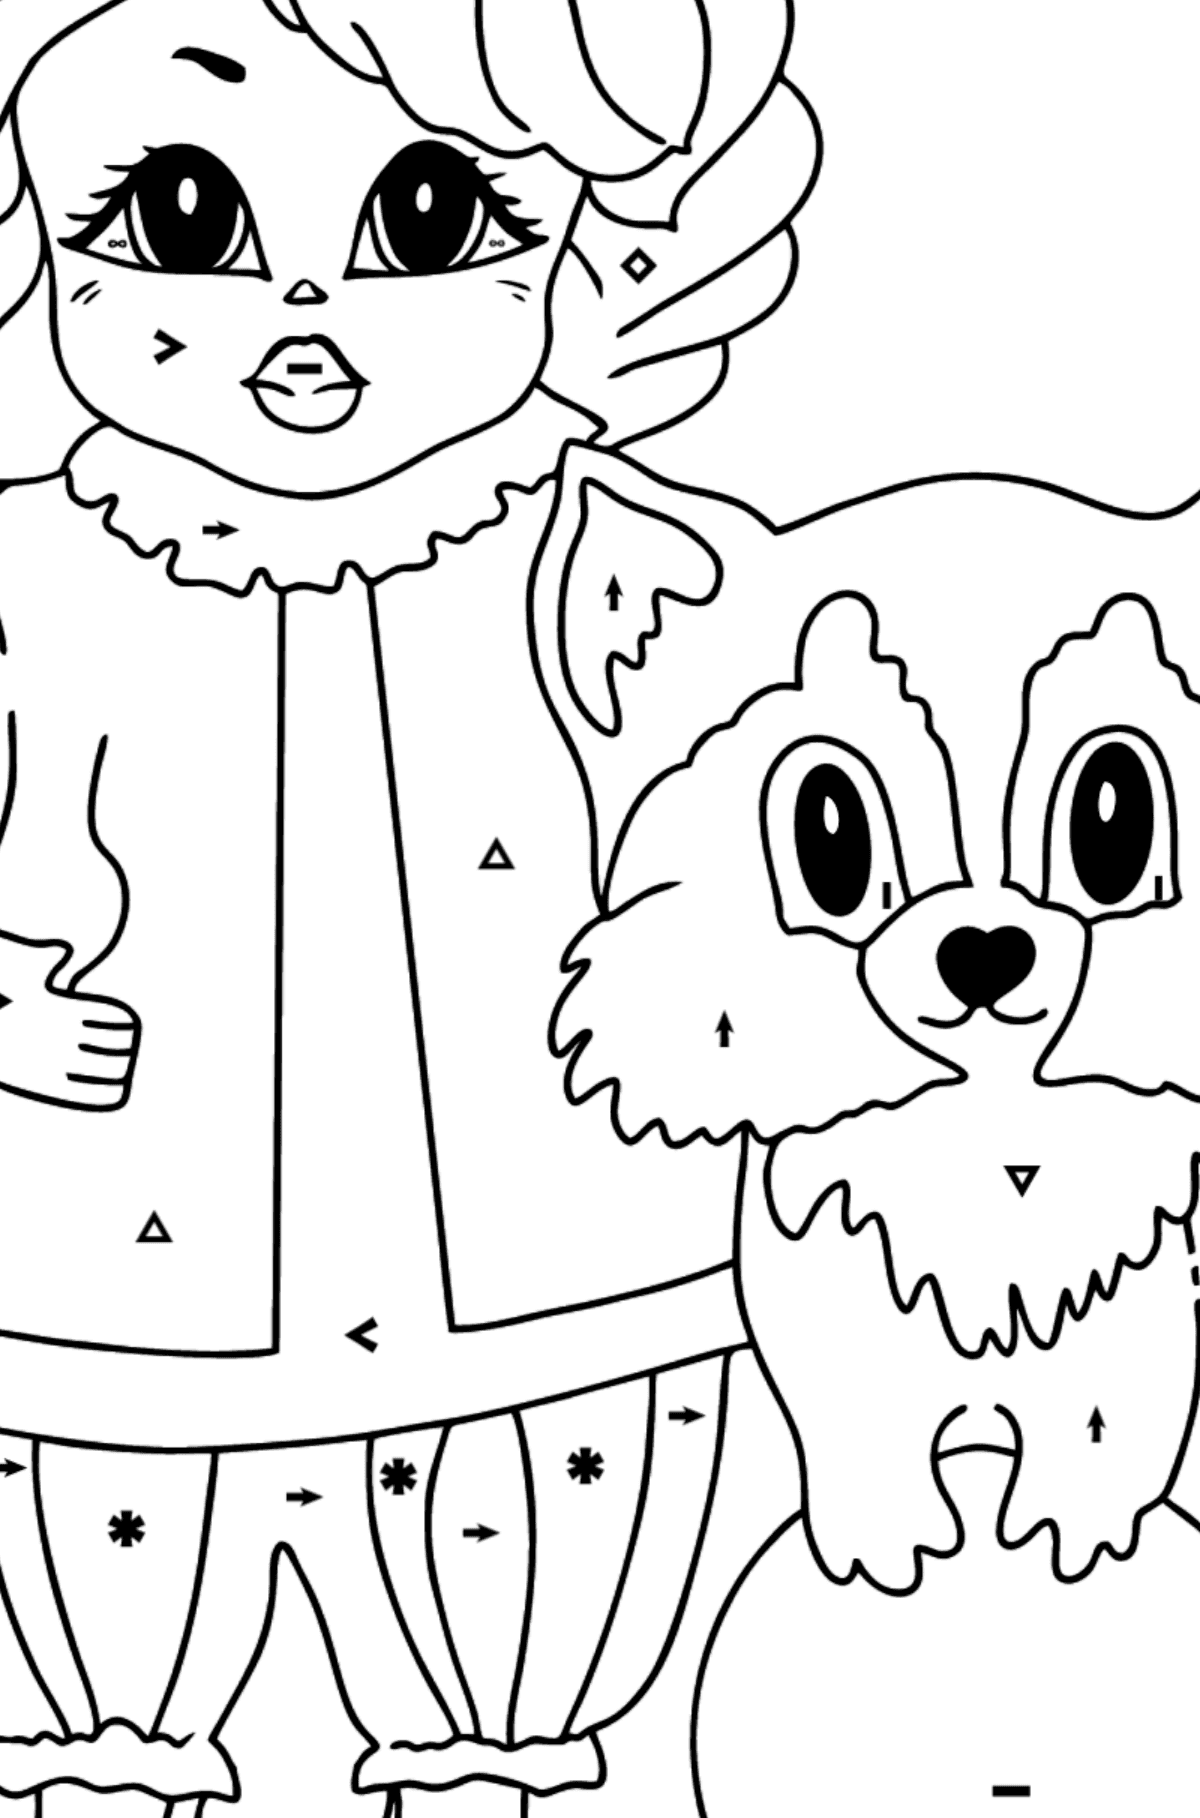 Coloring Page - A Princess with a Cat and a Racoon - Coloring by Symbols for Kids